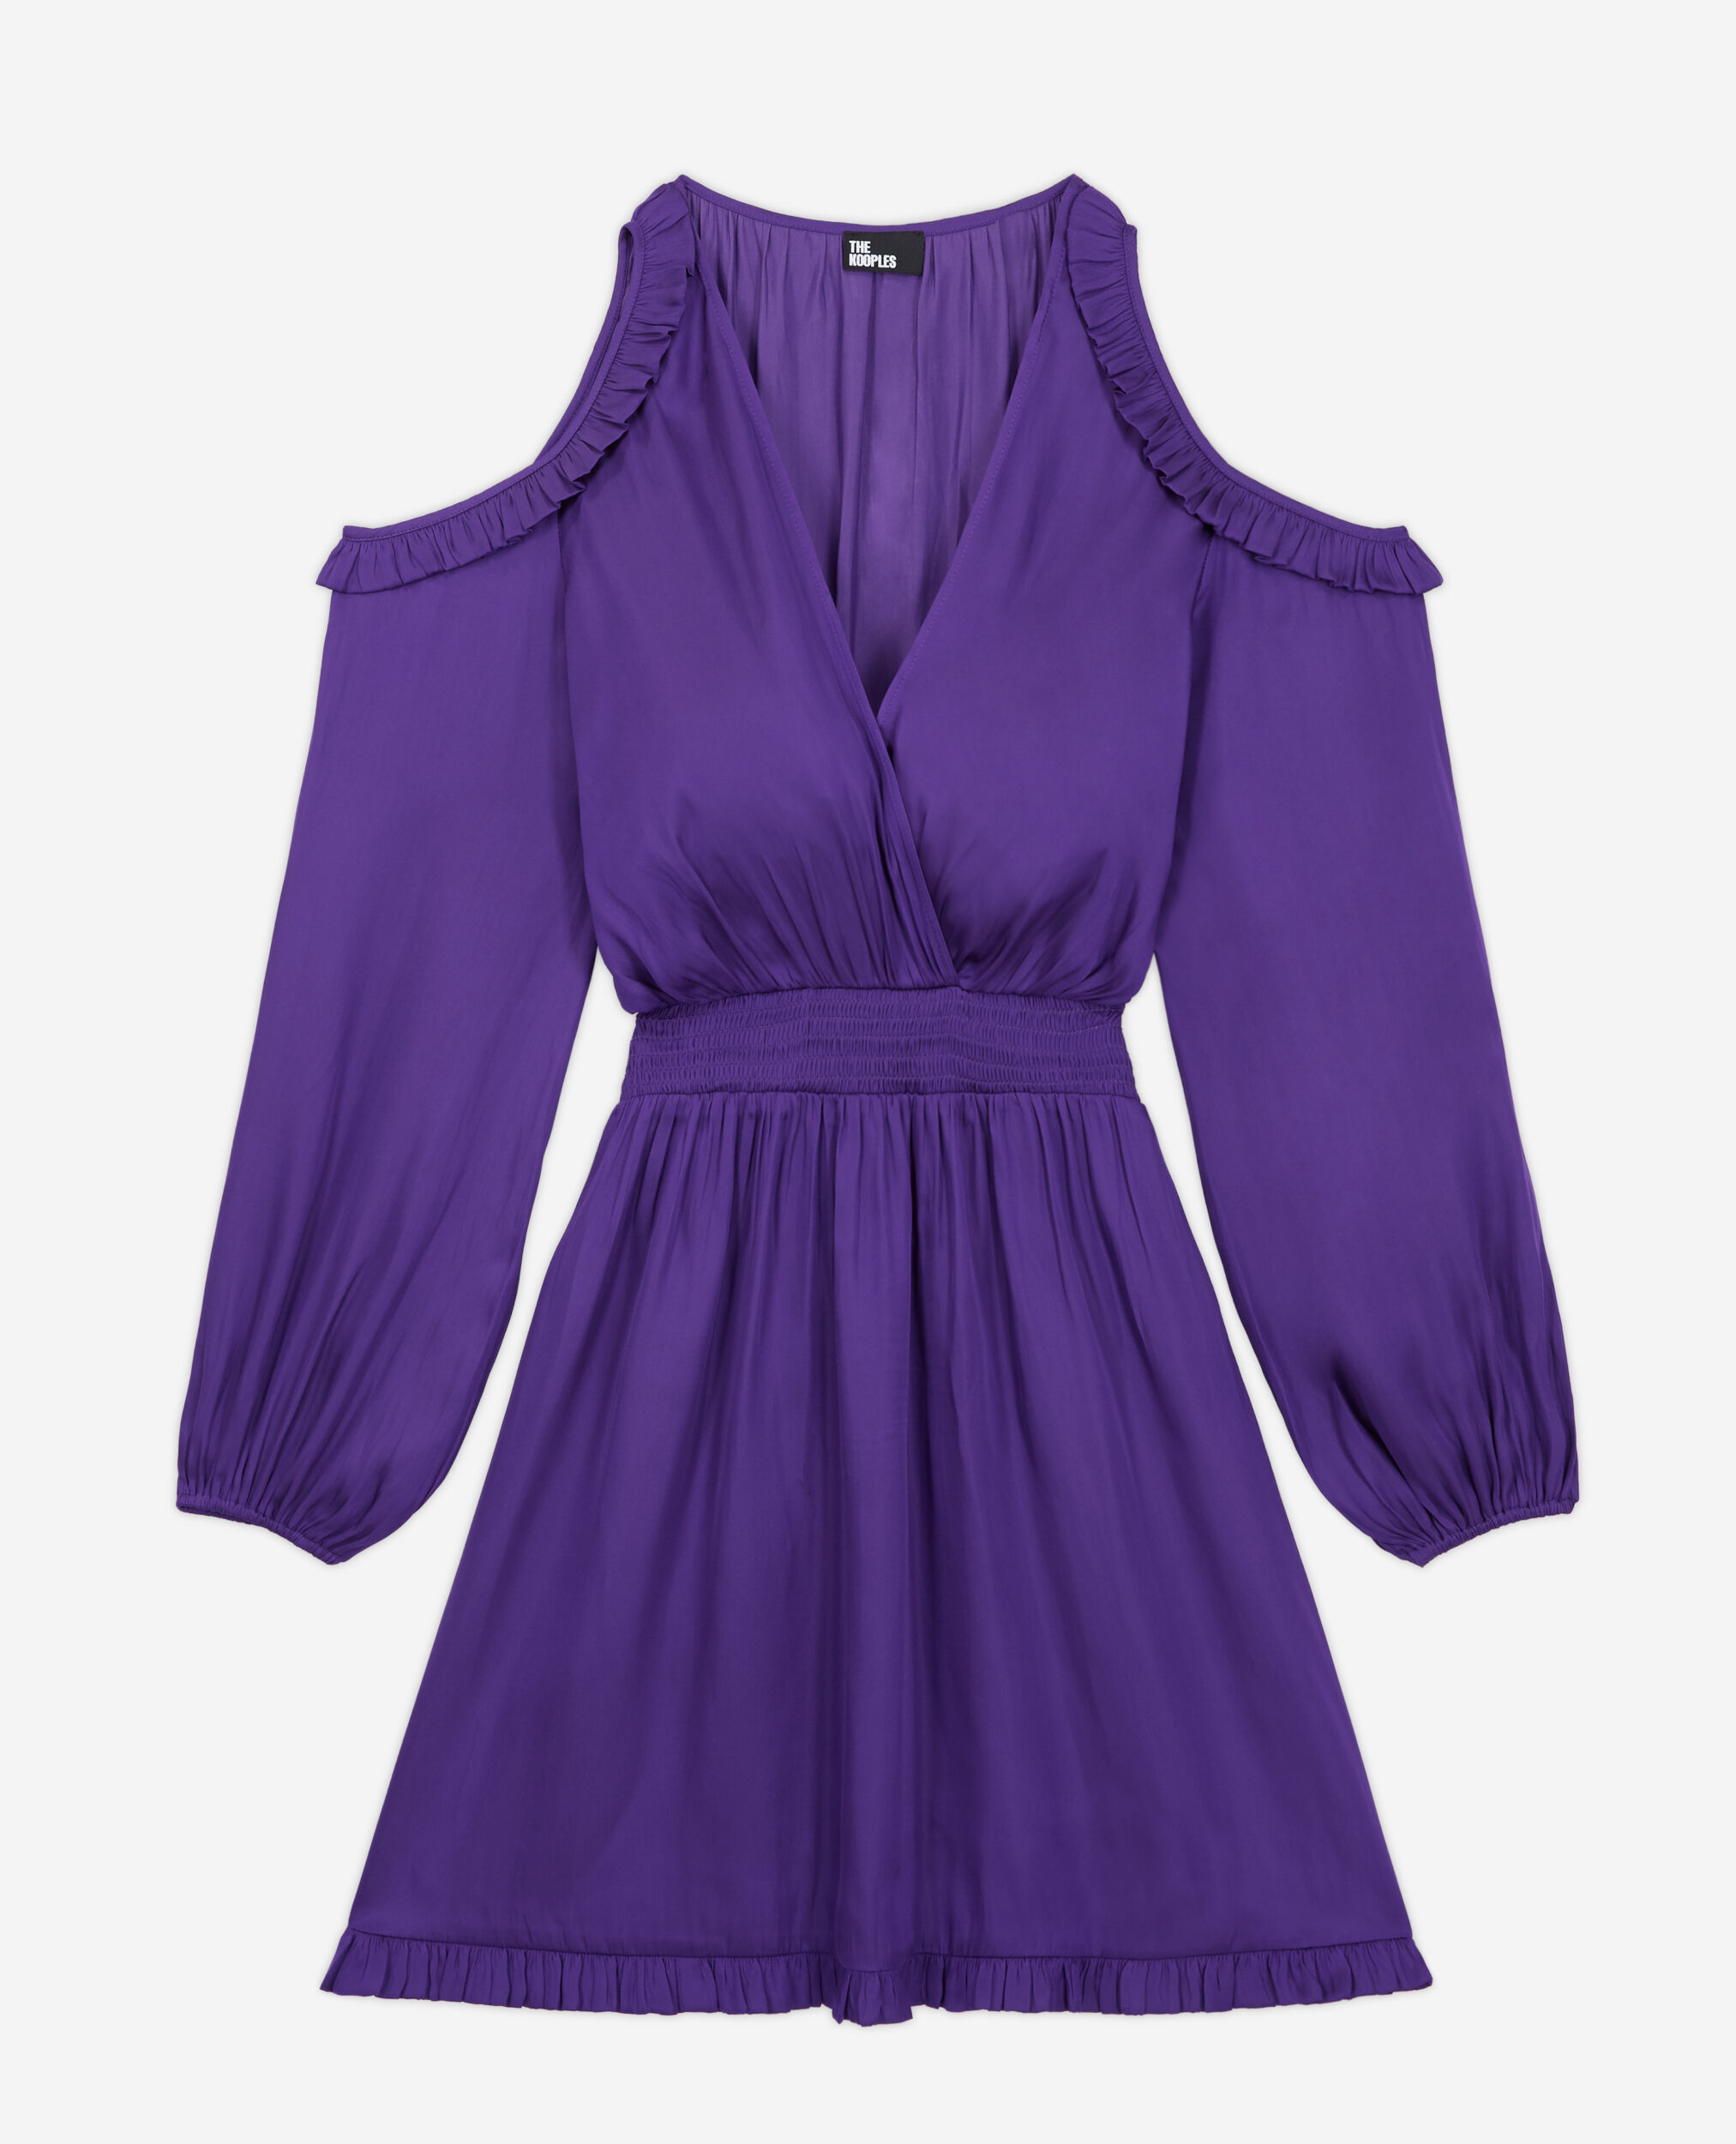 Short purple dress with ruffles, PURPLE, hi-res image number null